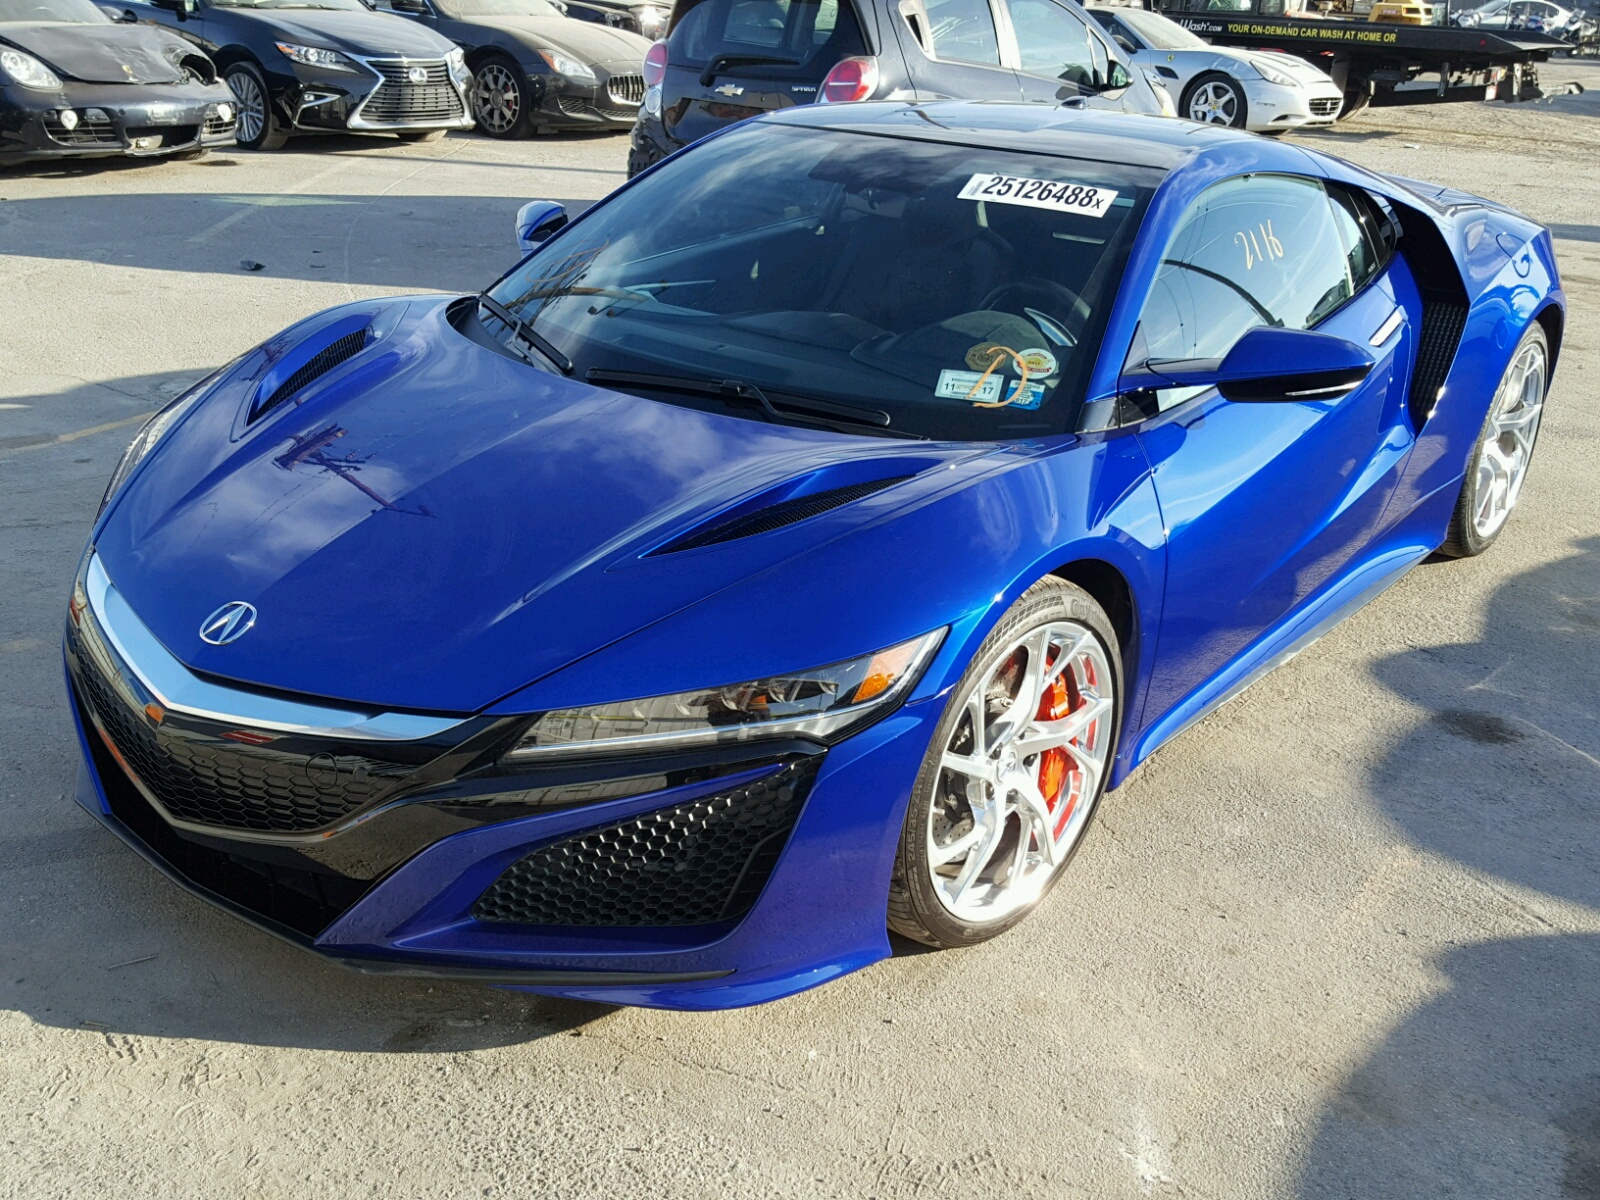 2017 Acura Nsx 3.5L 6 in CA - Los Angeles ...